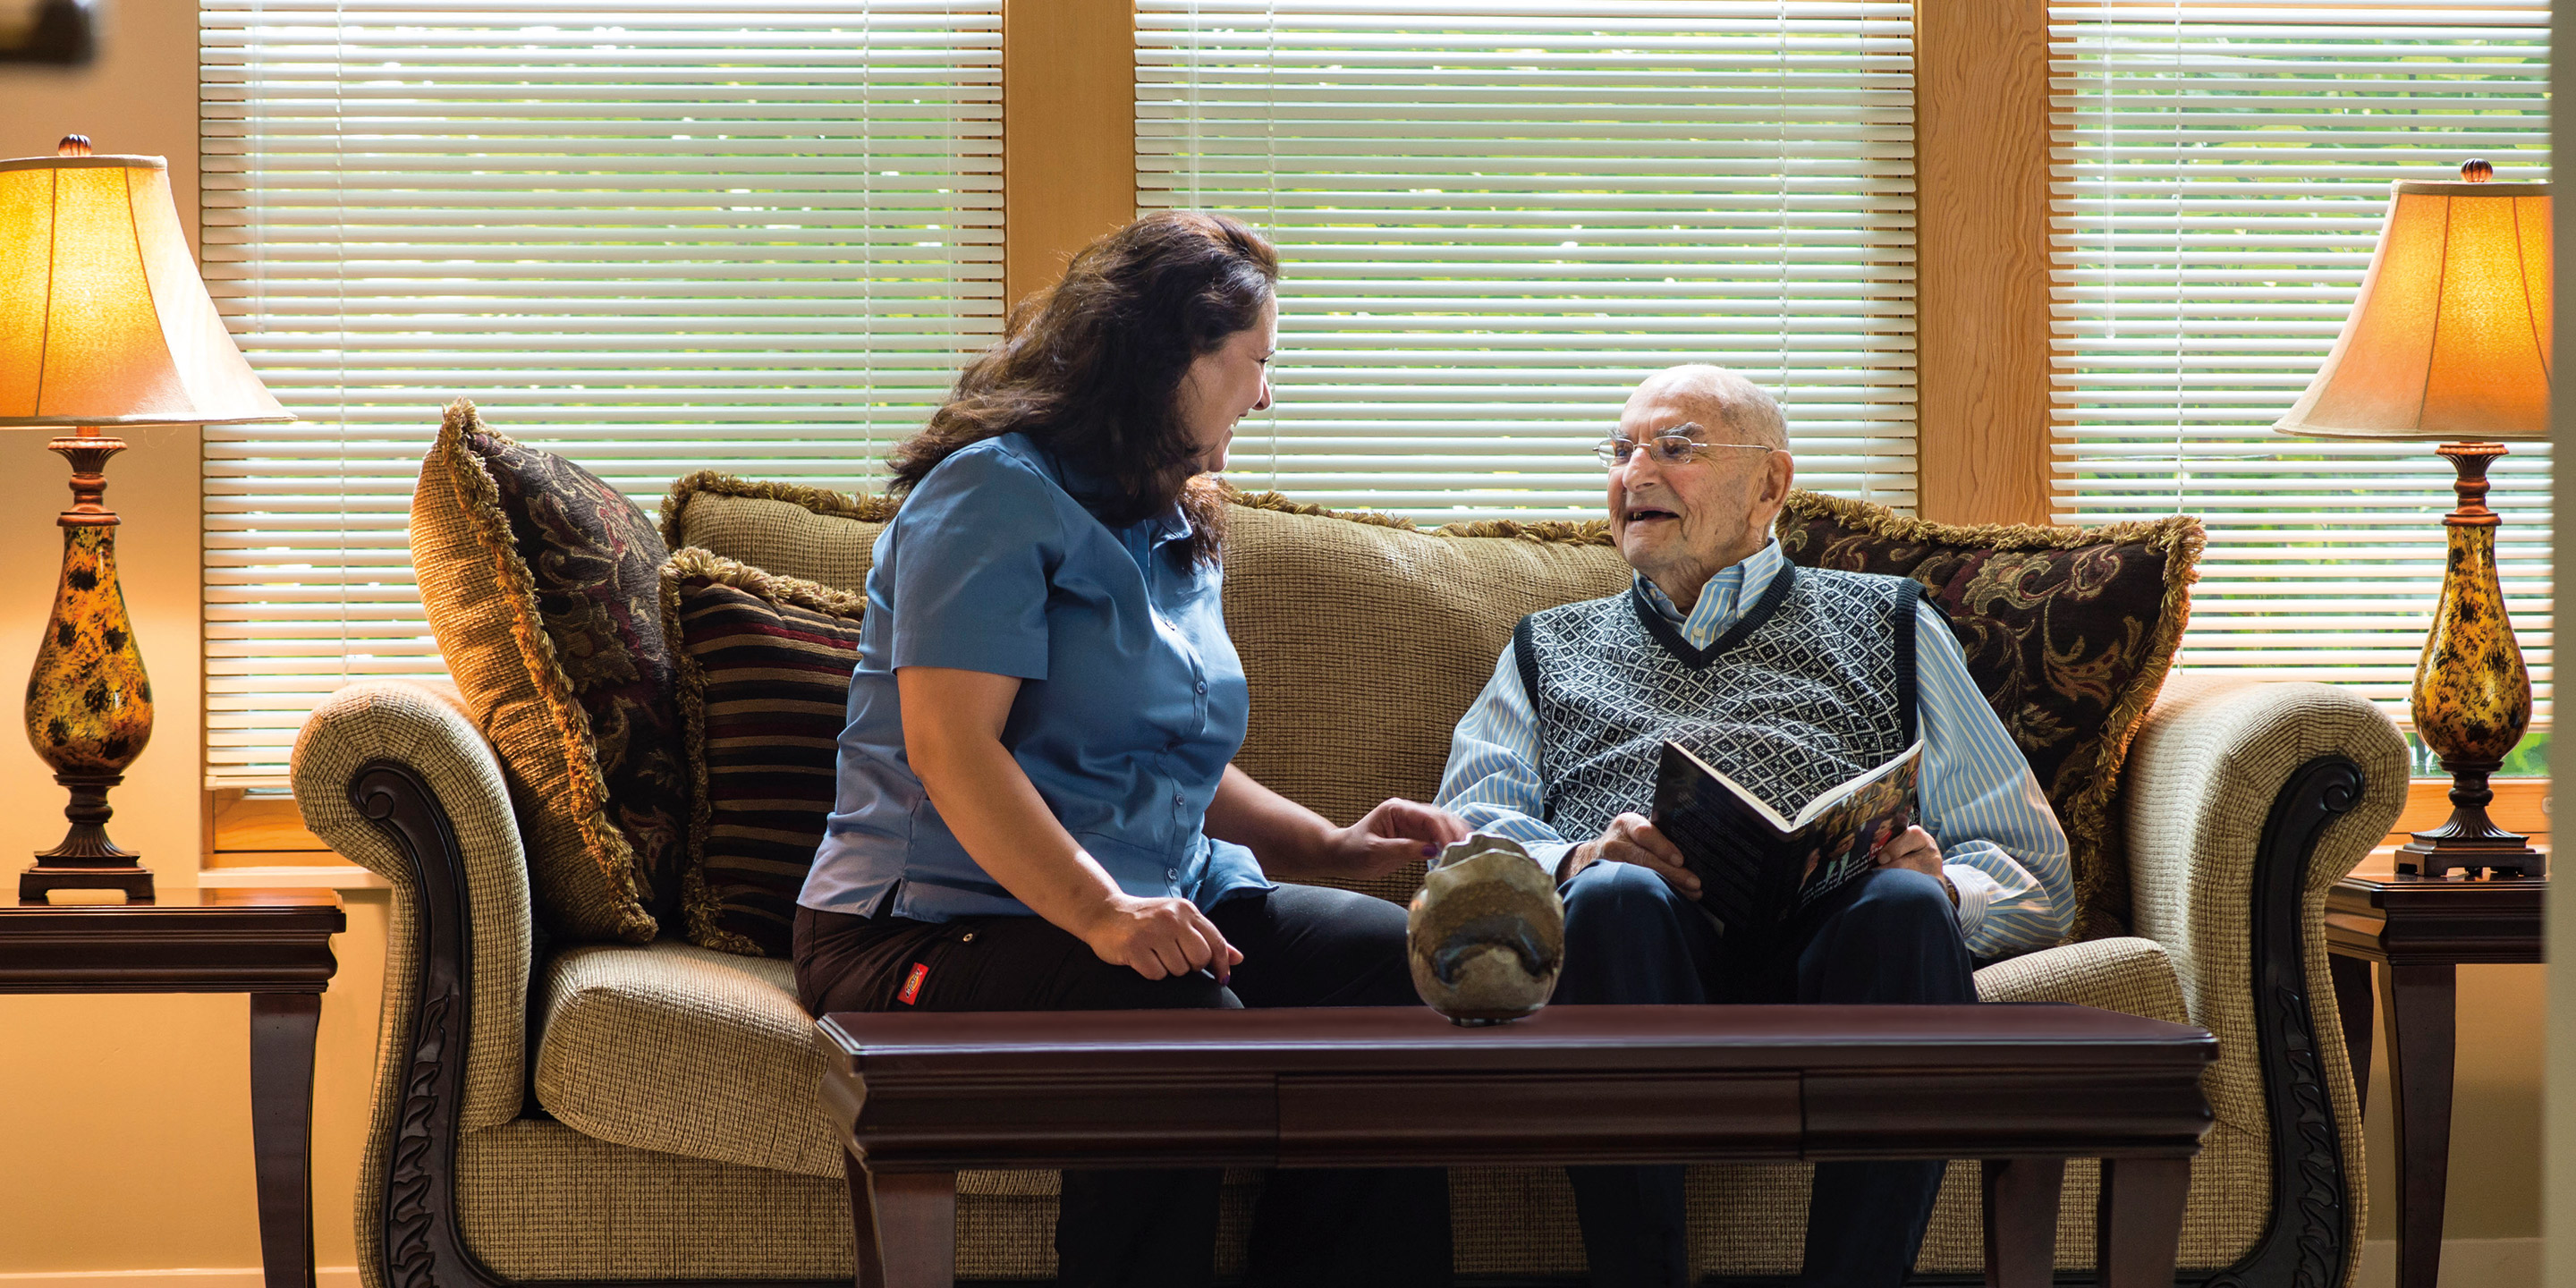 An older male sits on a couch with a woman caregiver and reads.